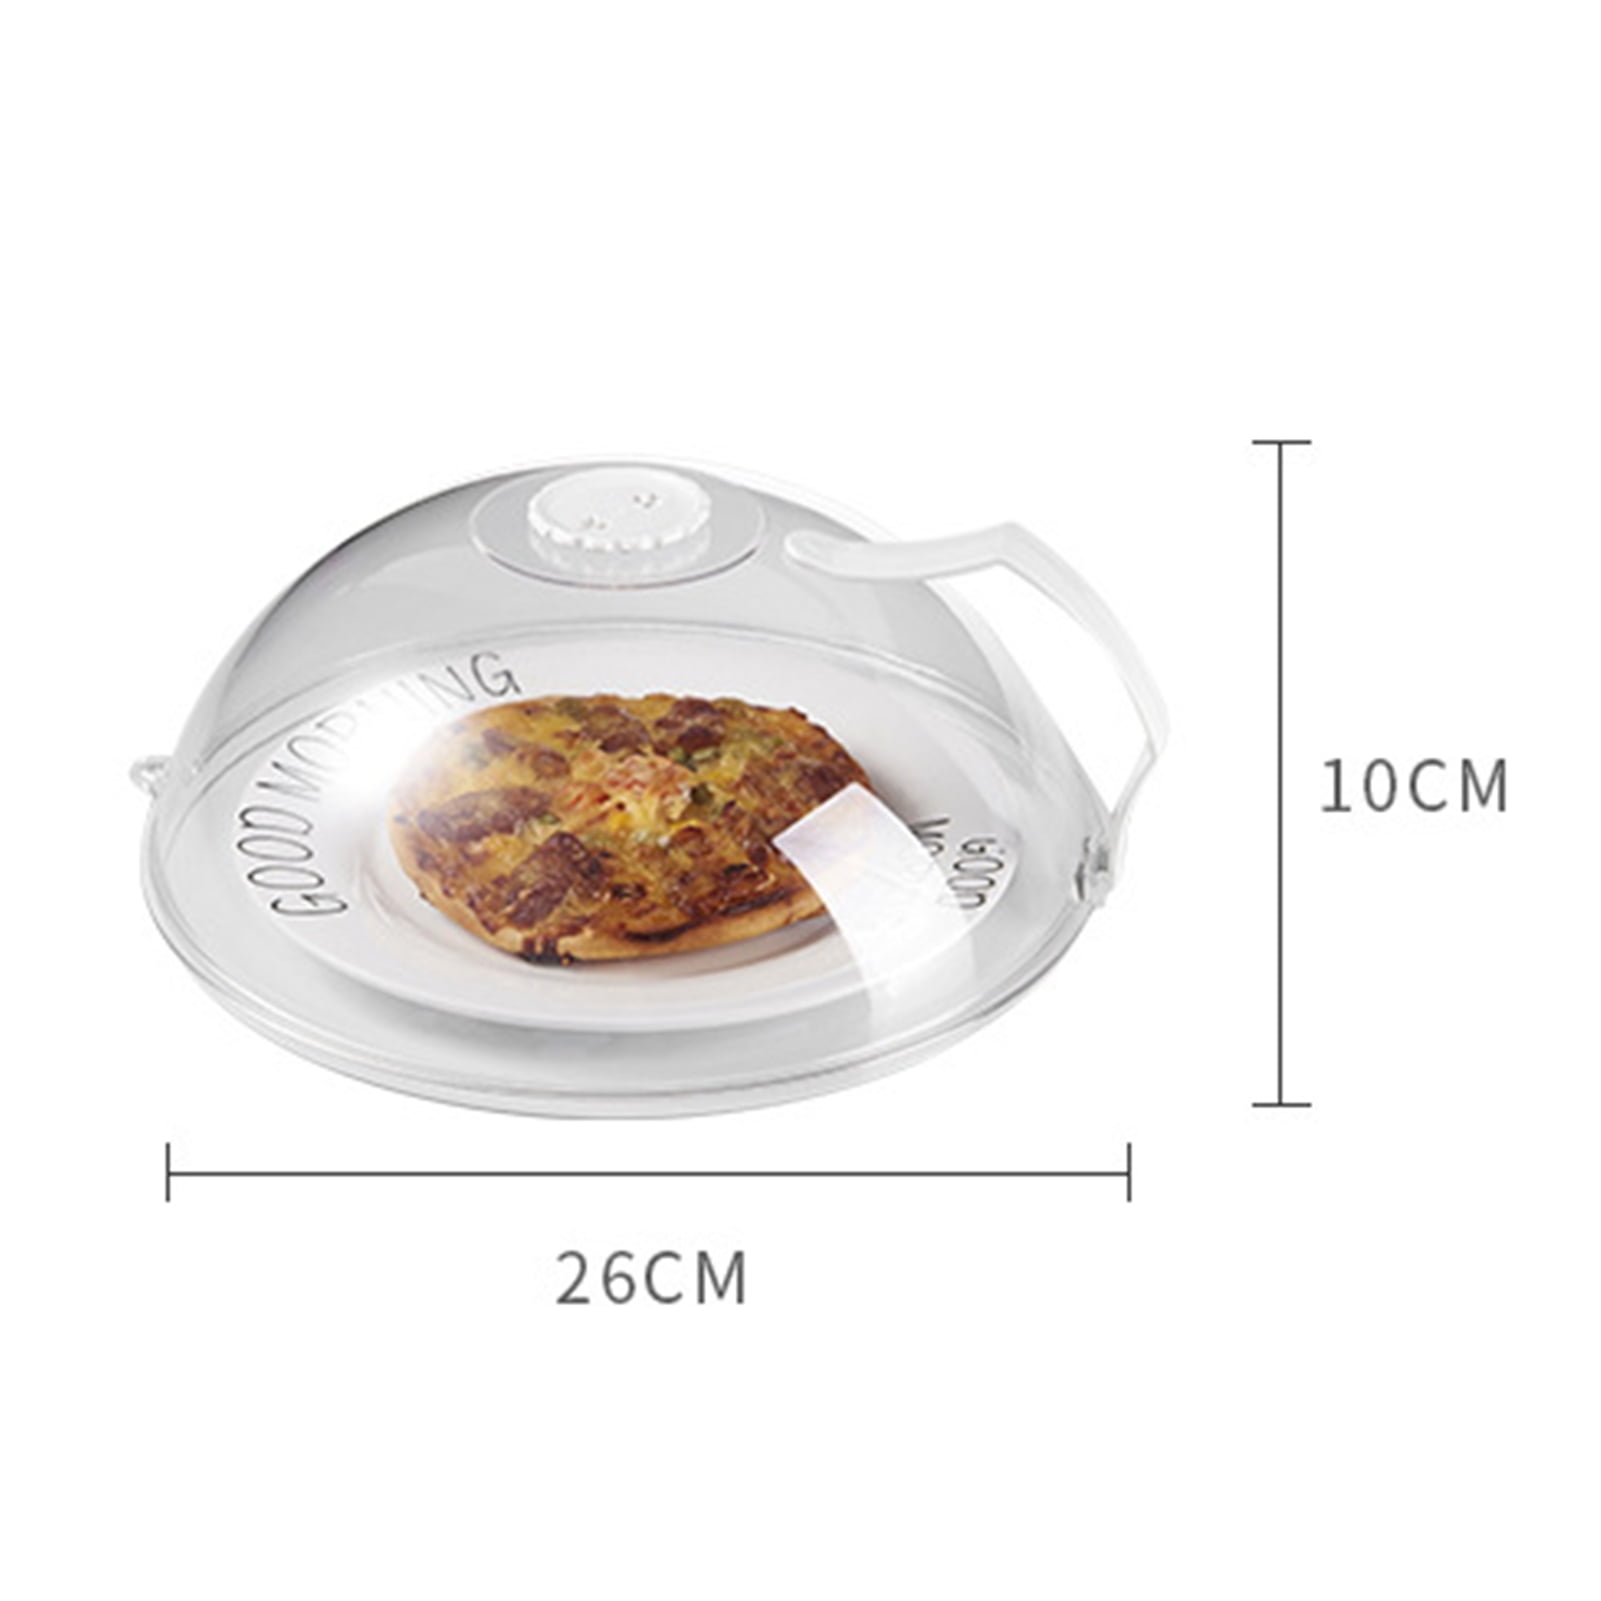 Microwave Splatter Cover Keeps Your Microwave Spotless, BA291 - On